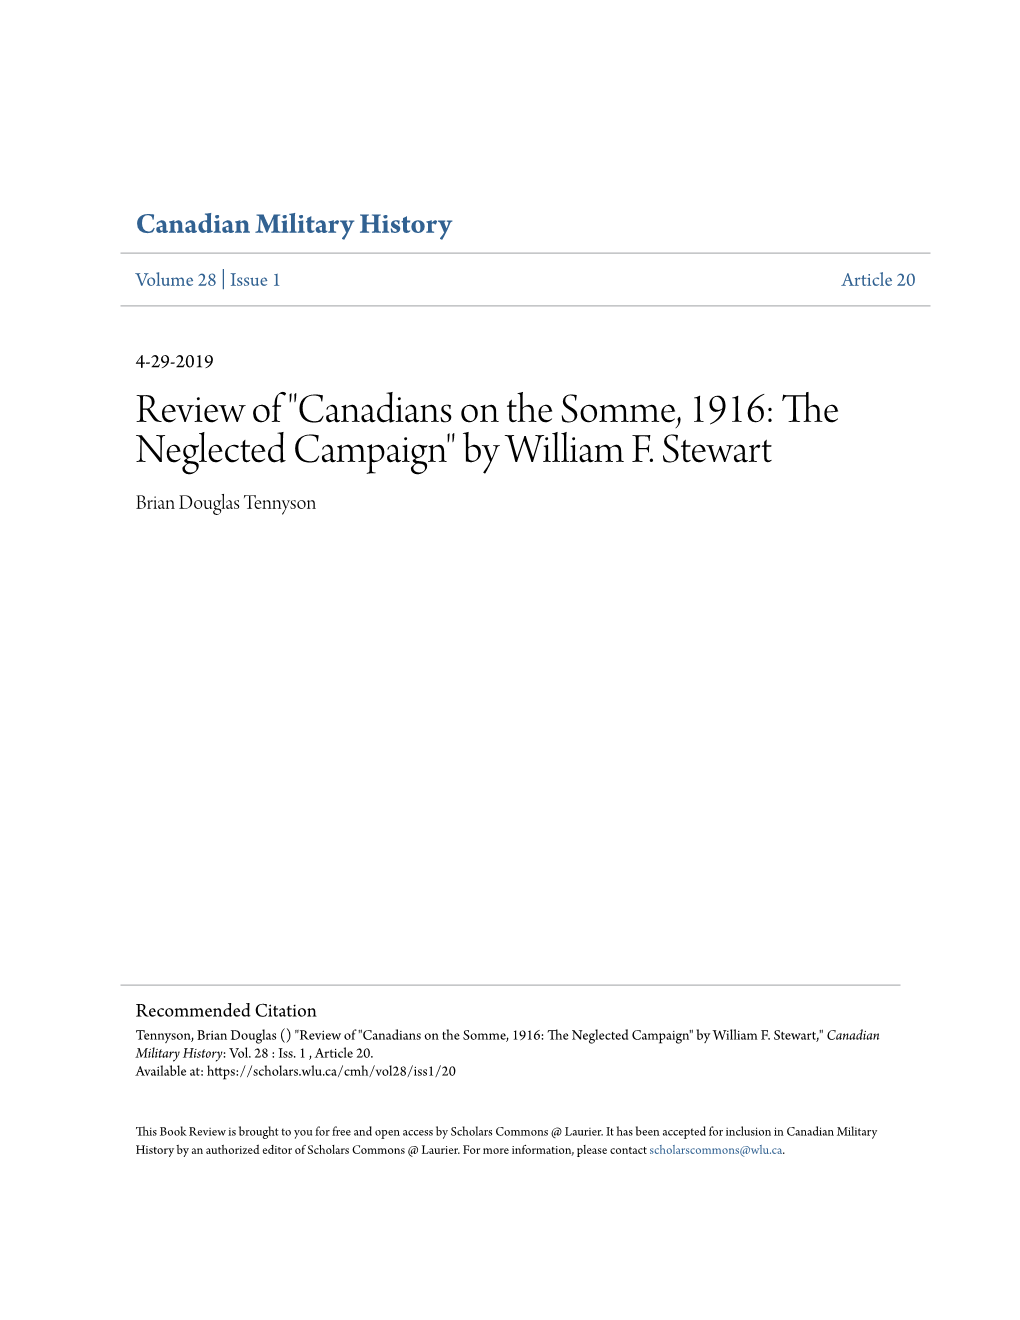 Canadians on the Somme, 1916: the Neglected Campaign" by William F